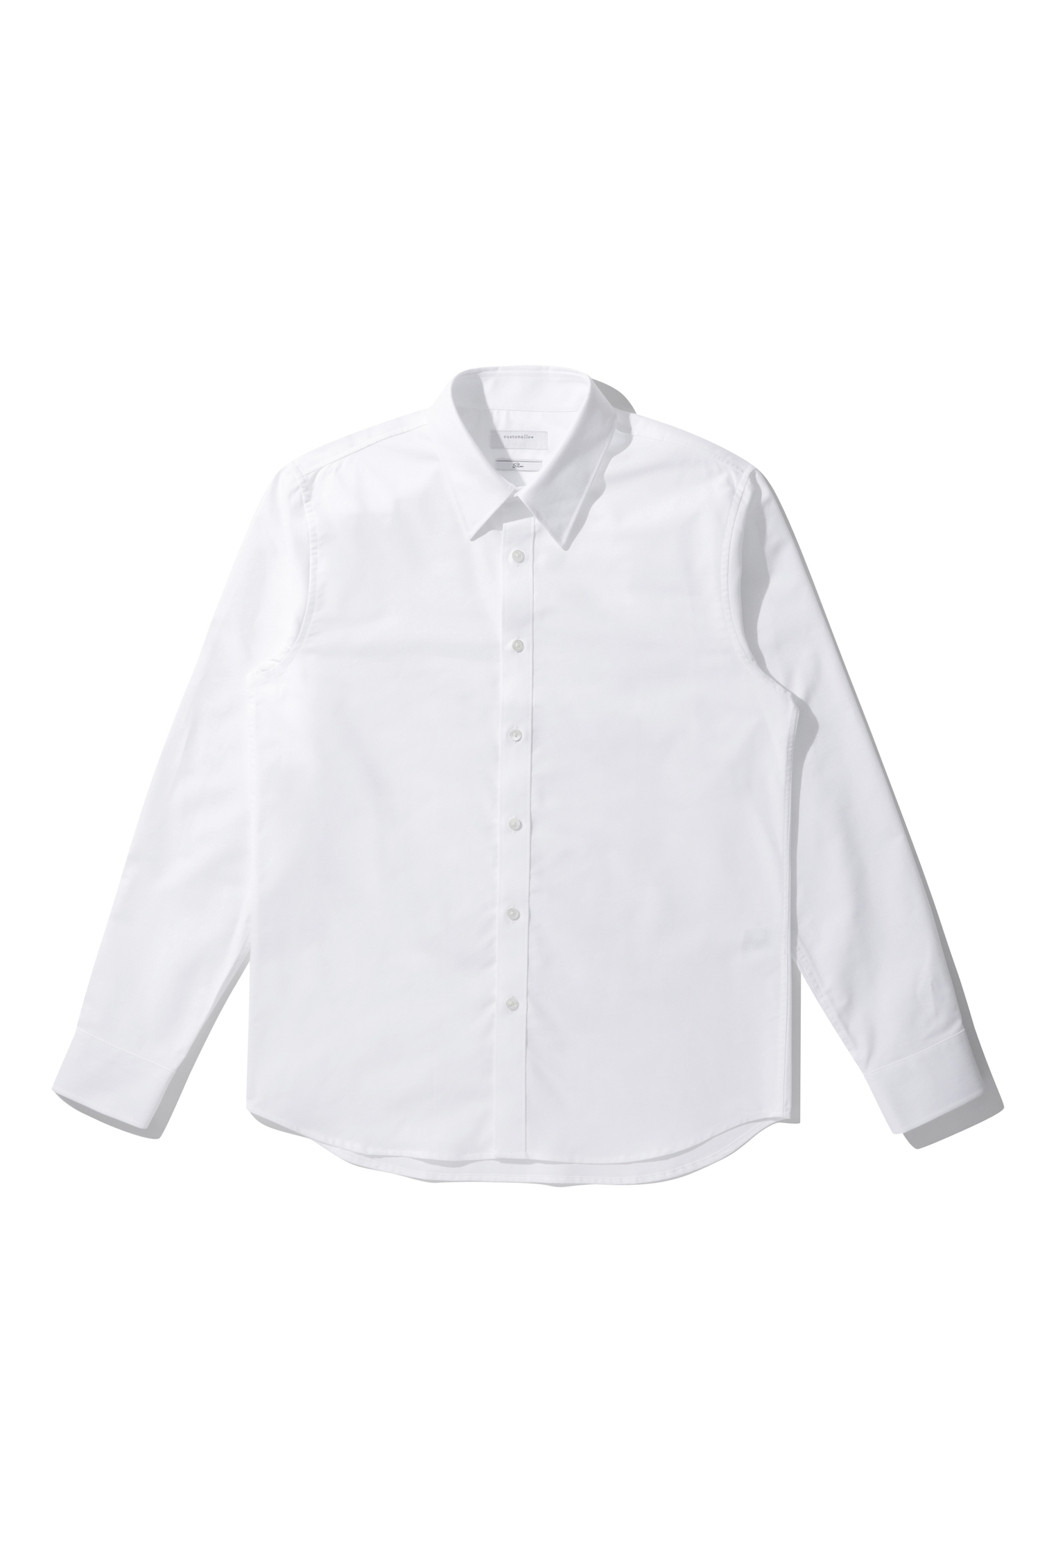 somelos new classic collar dress shirts_CUSTOMELLOW